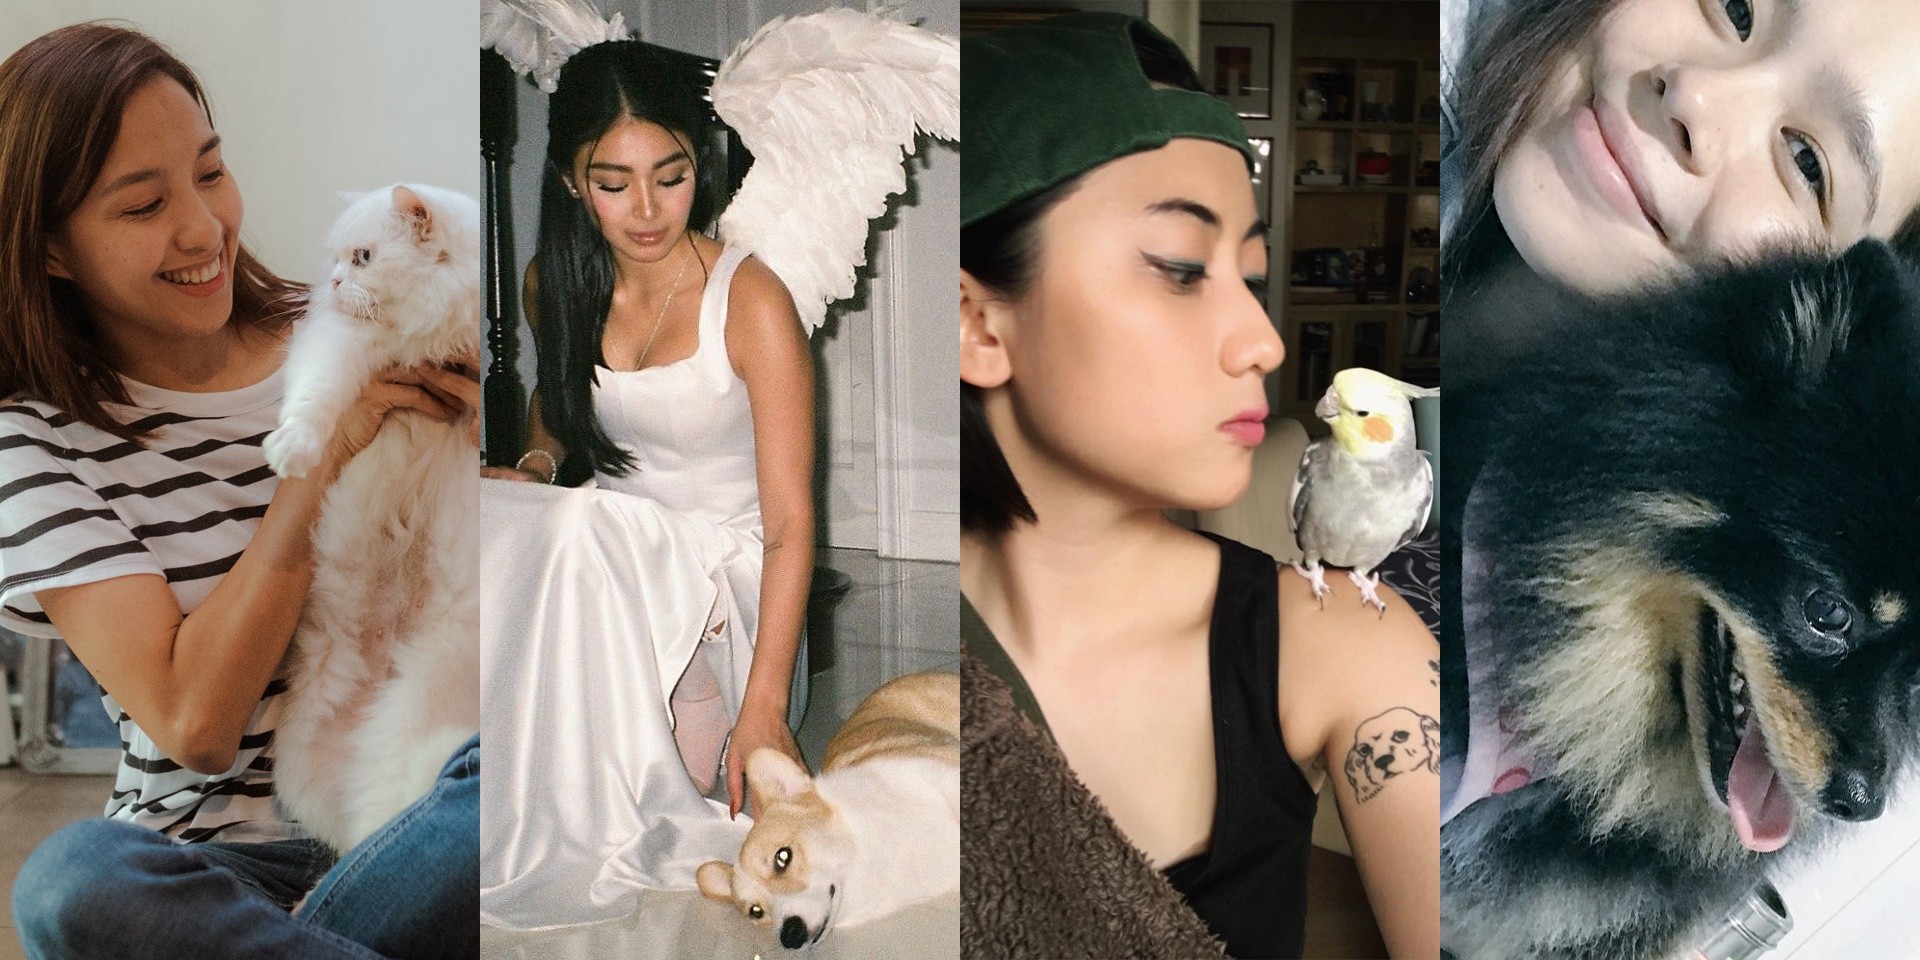 Filipino musicians and their pets